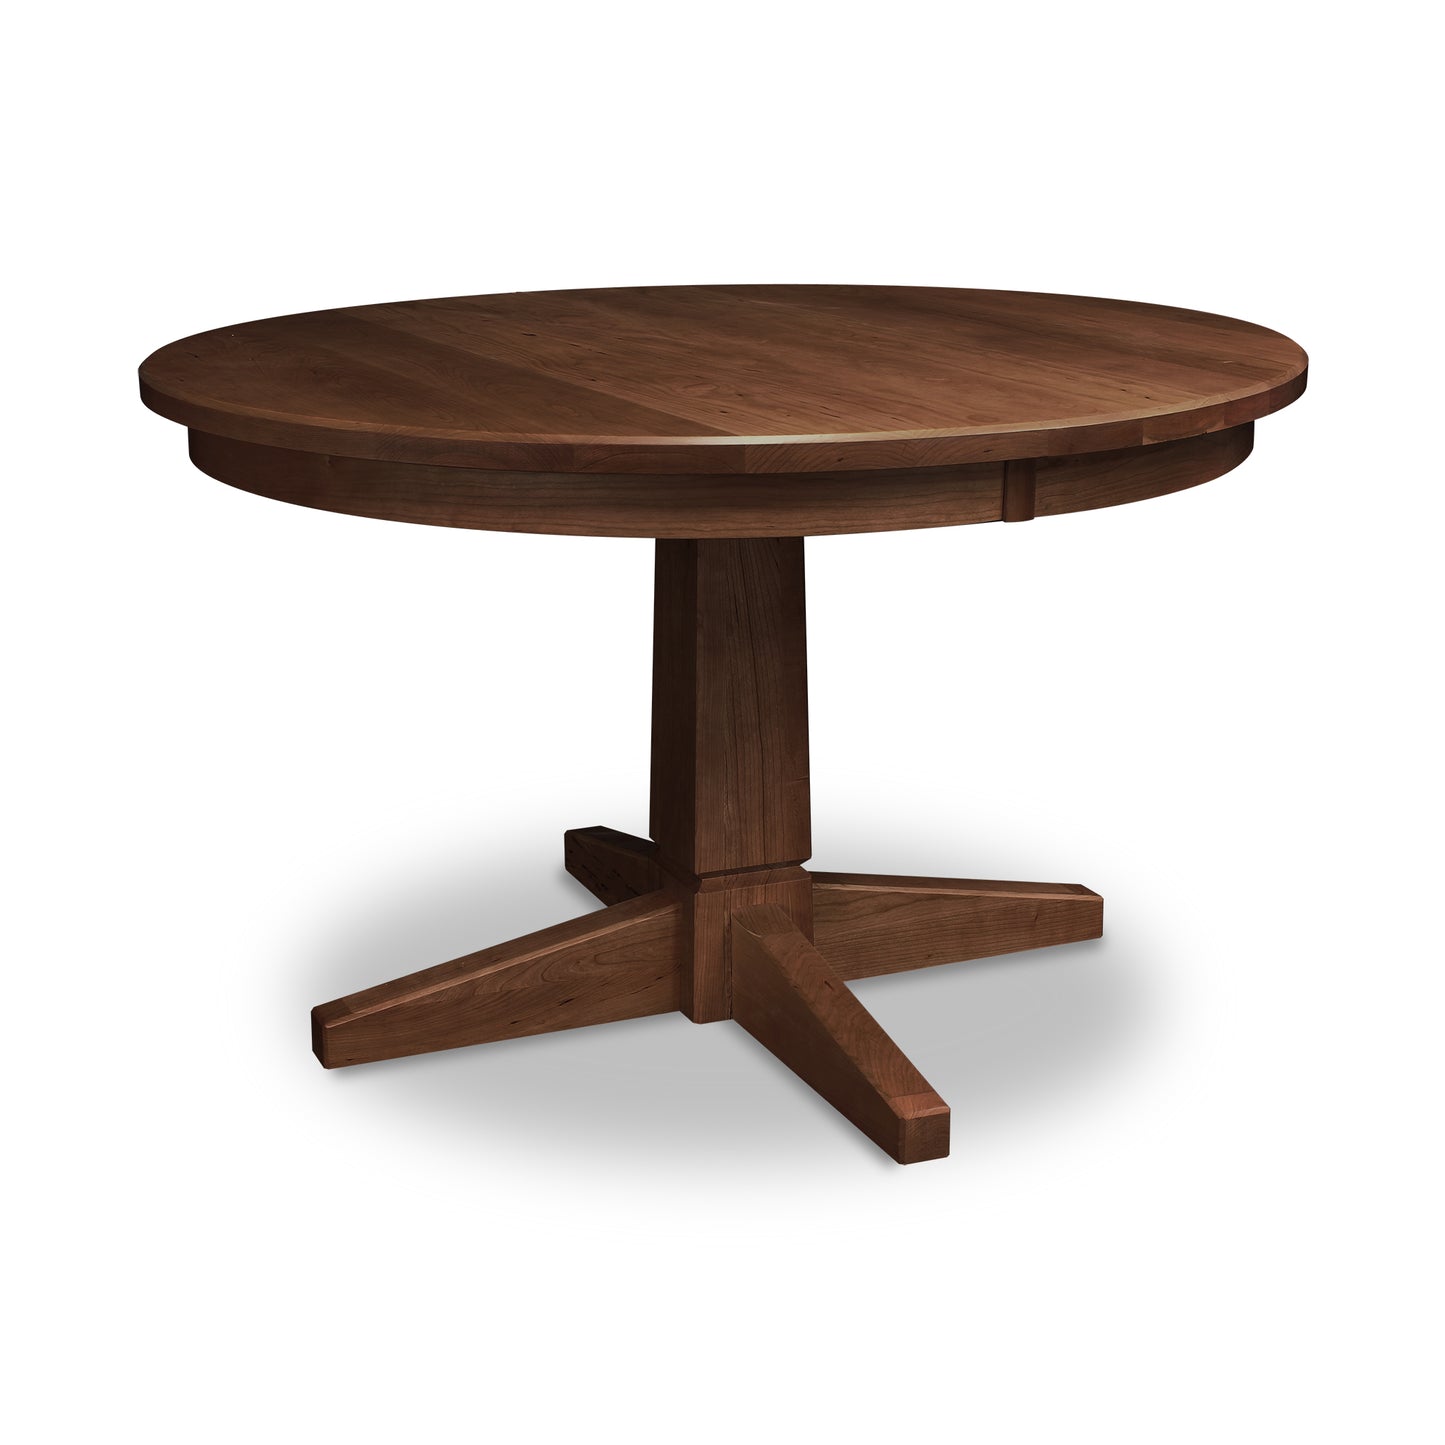 A round Natural Vermont Single Pedestal Round Solid Top Table with four legs on a white background by Lyndon Furniture.